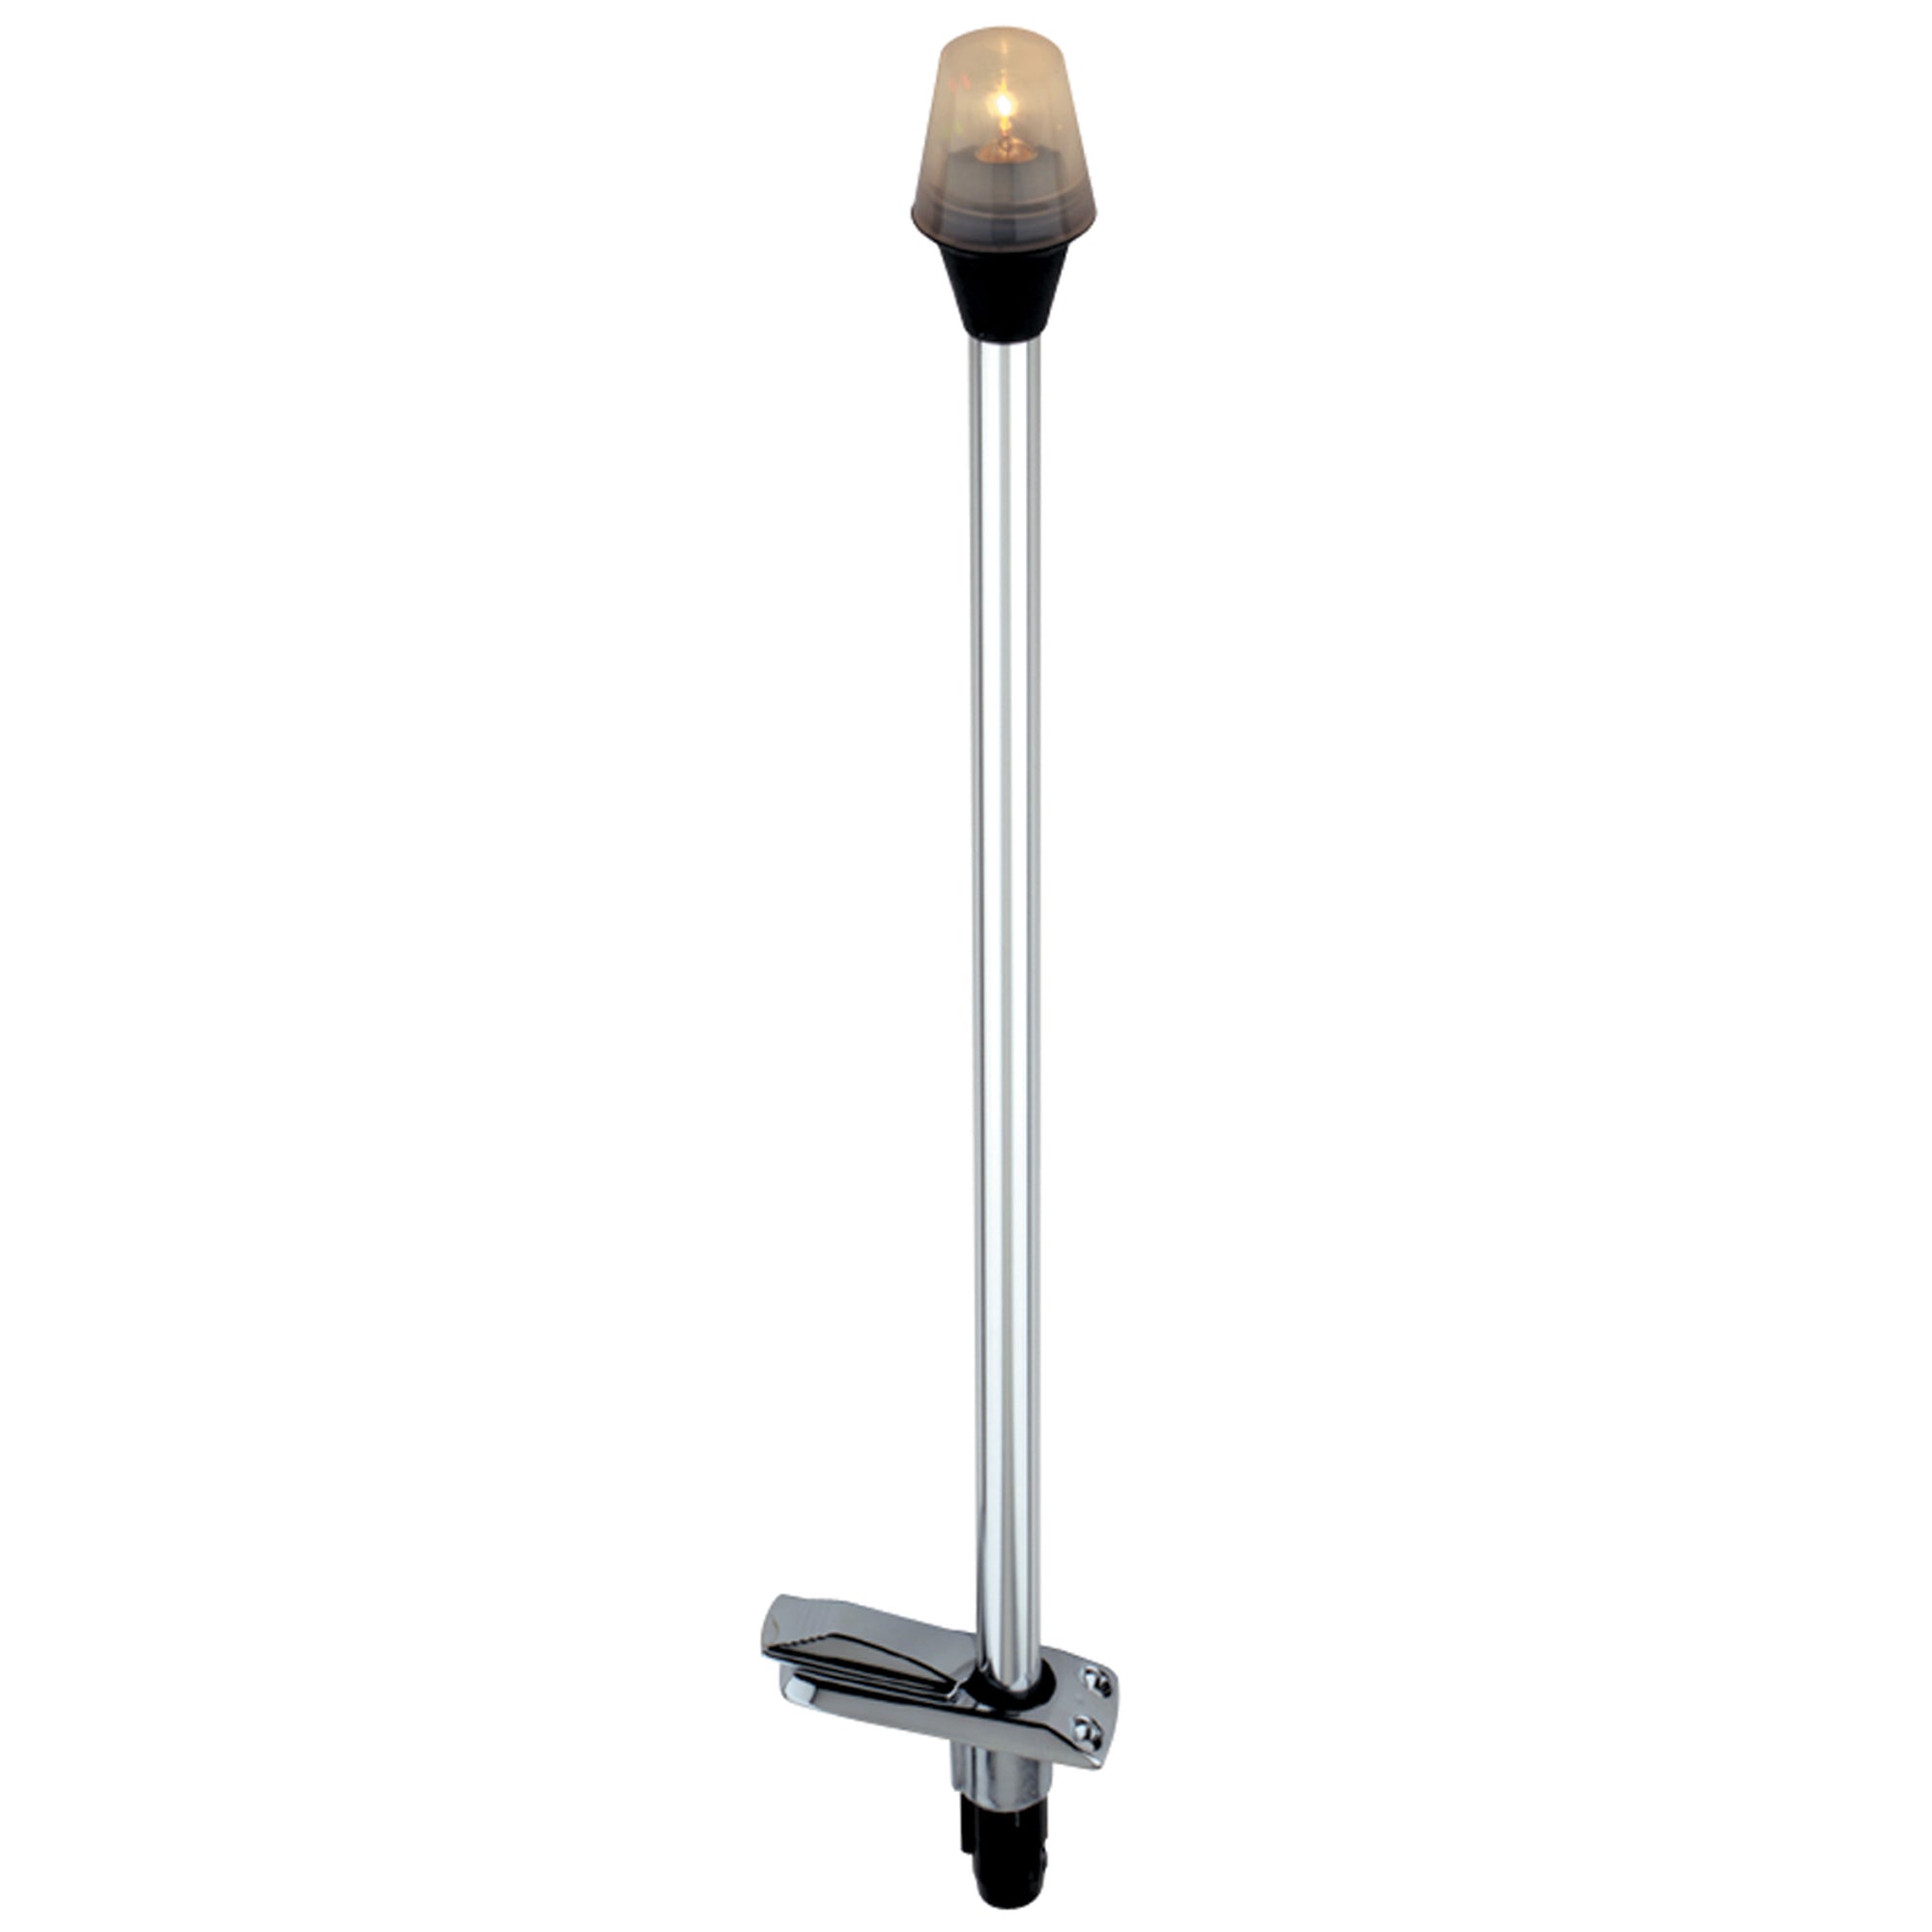 Attwood 7100C7 Stowaway Two-Mile Pole Light with Plug-In Base - 36"